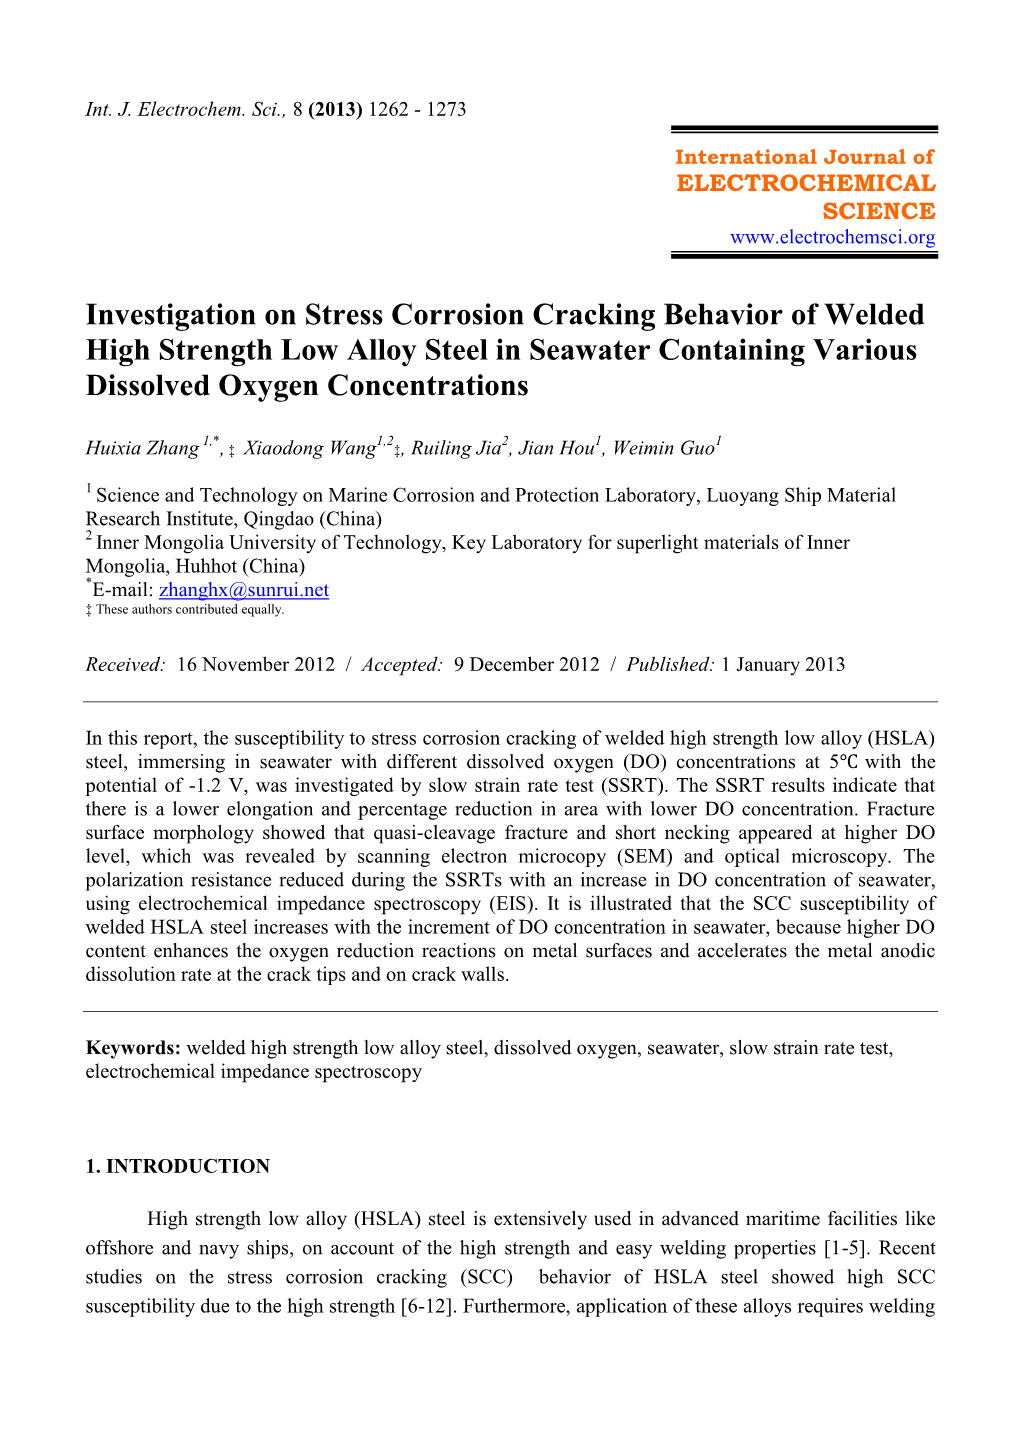 Investigation on Stress Corrosion Cracking Behavior of Welded High Strength Low Alloy Steel in Seawater Containing Various Dissolved Oxygen Concentrations